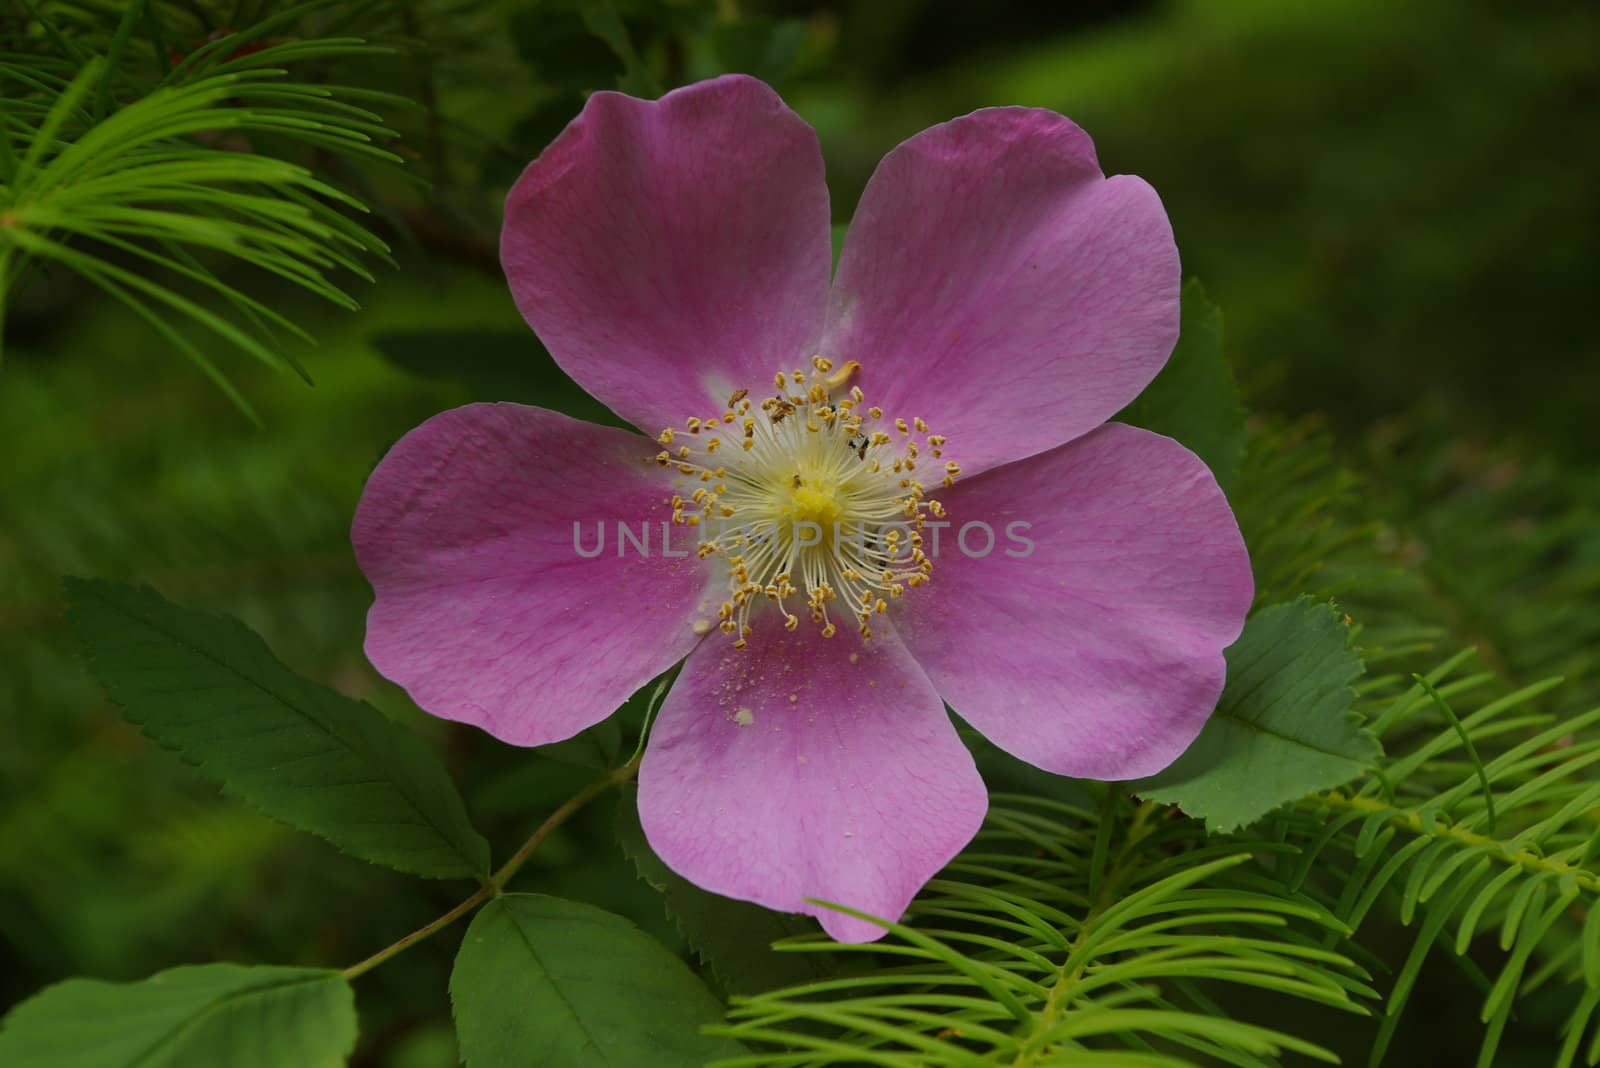 Close-up of a wild rose in bloom